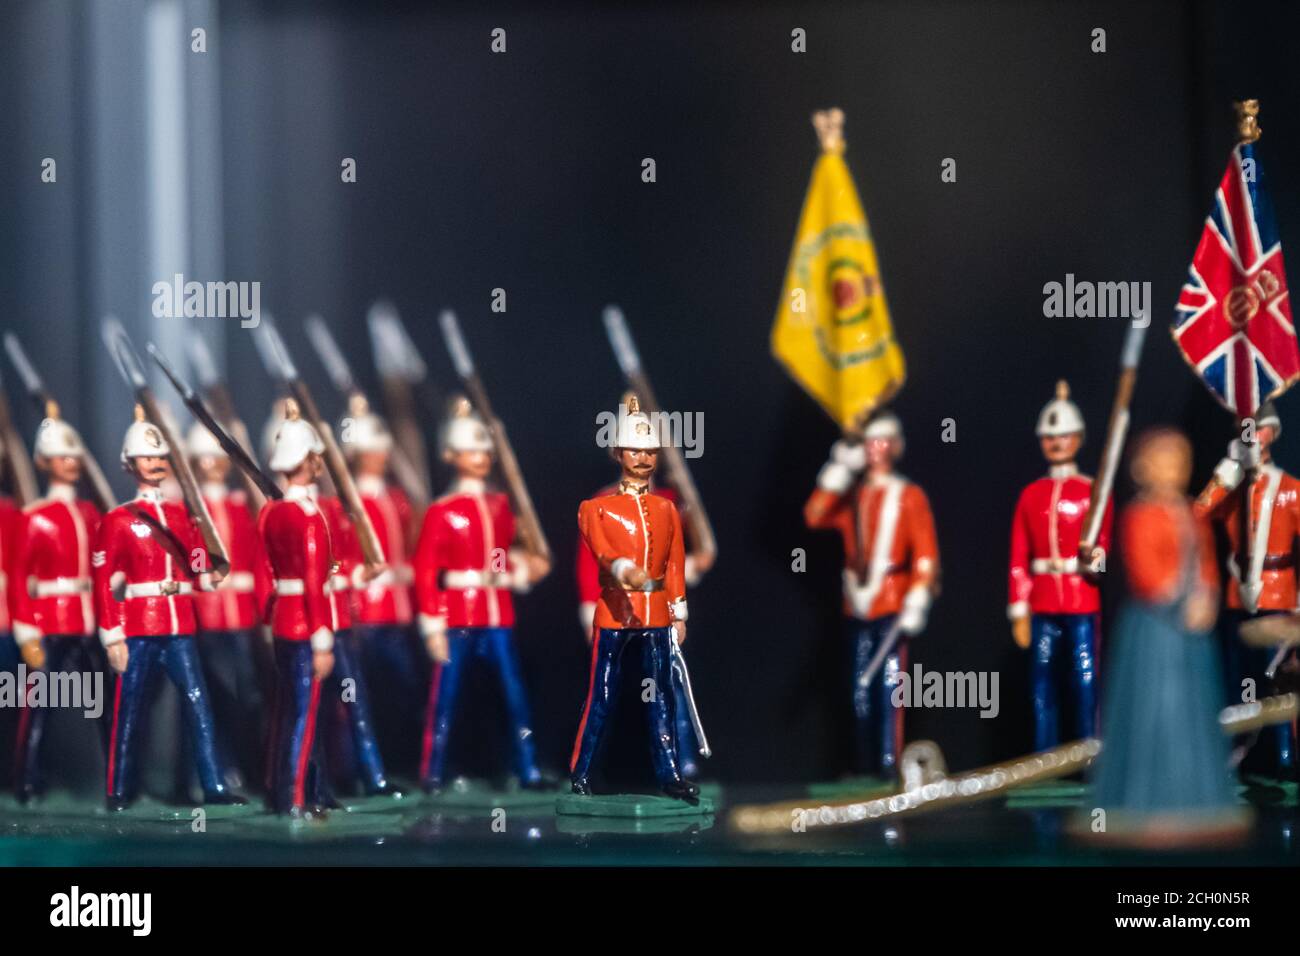 Toy figures of British army soldiers marching in formation on display in museum Stock Photo